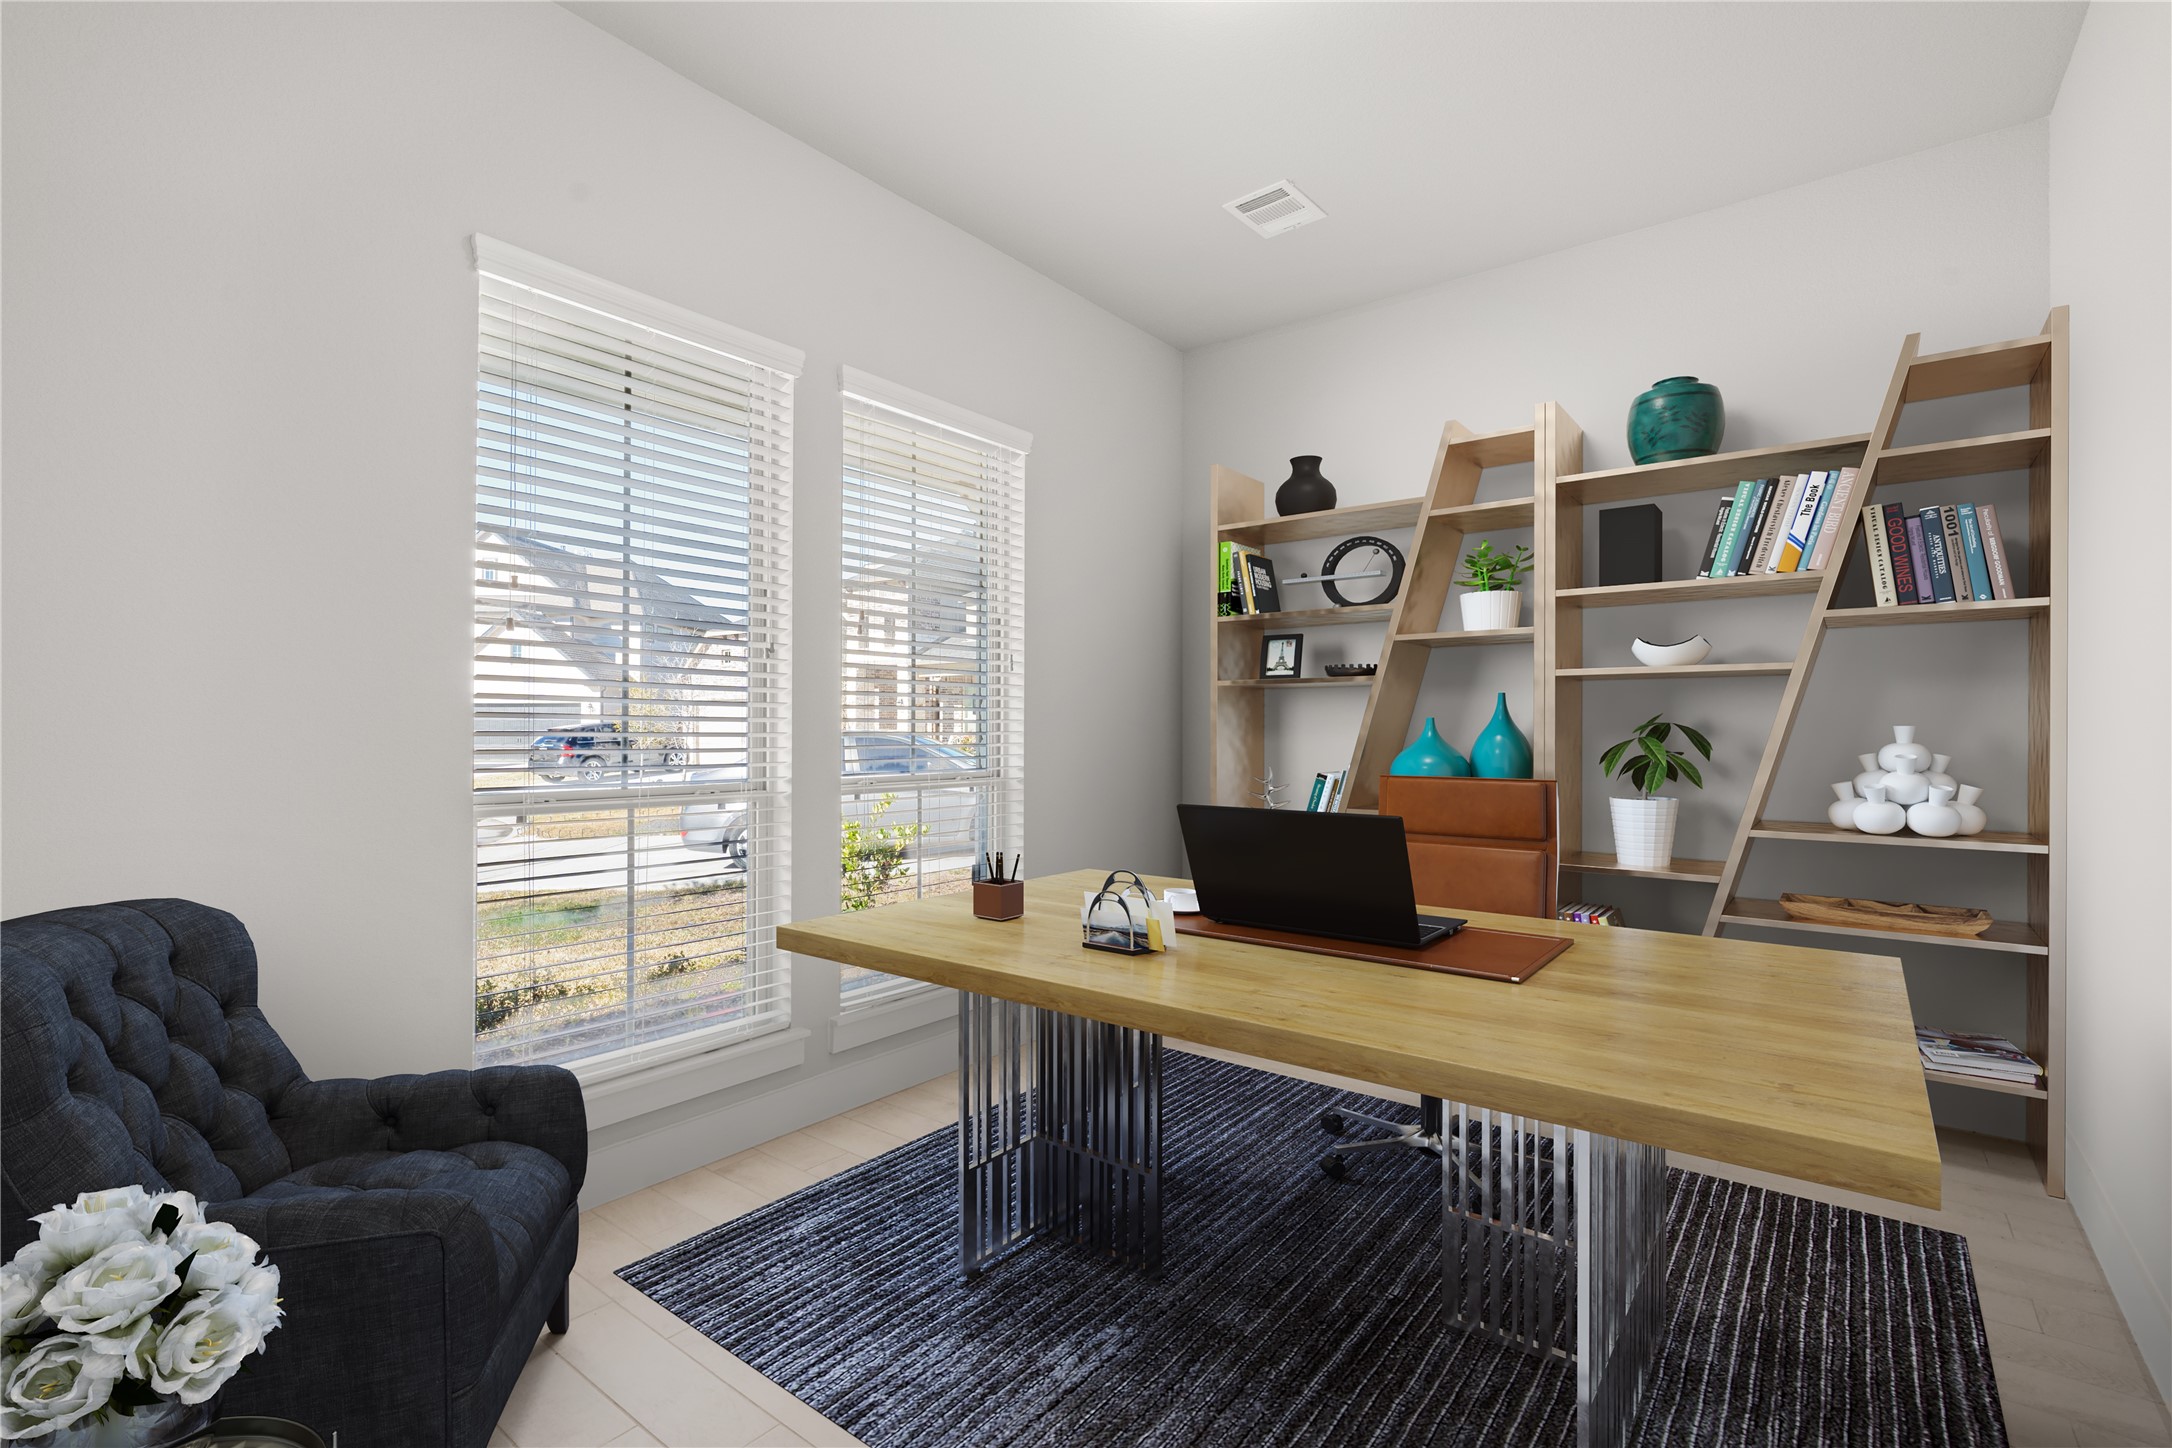 Quietly nestled in front of the home is the handsome home office. Featuring gorgeous flooring, custom paint and large windows with privacy blinds.